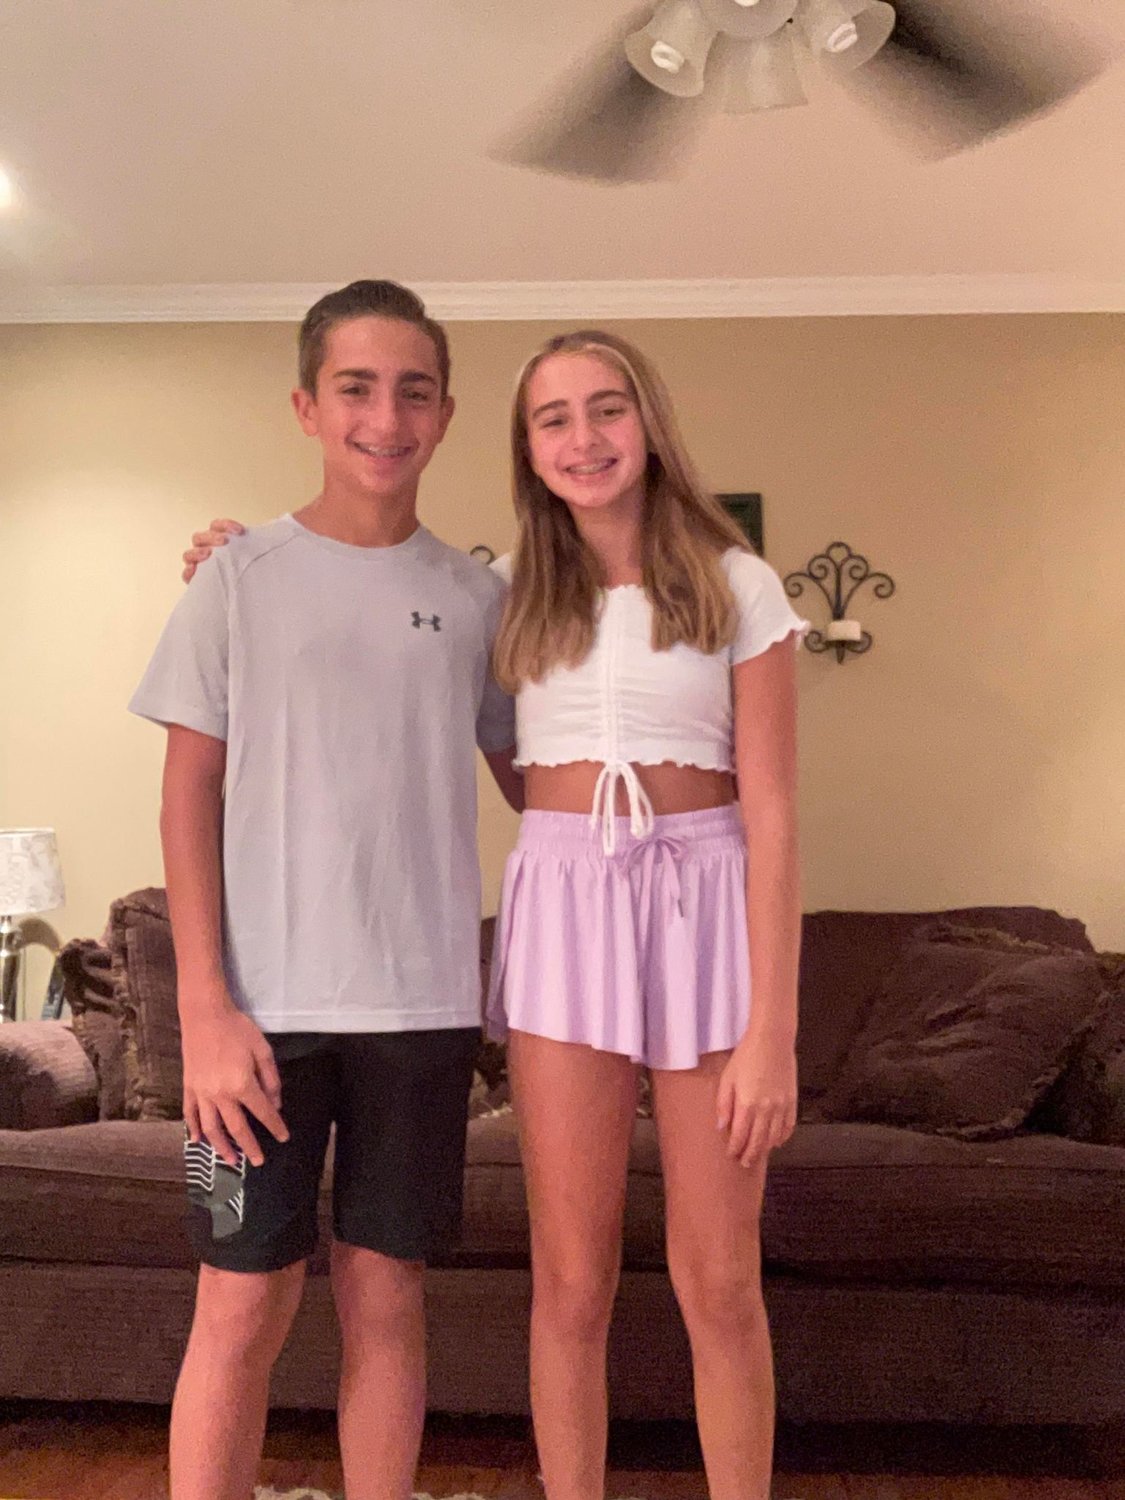 These twins celebrated their first day of seventh grade
at East Moriches Middle School.